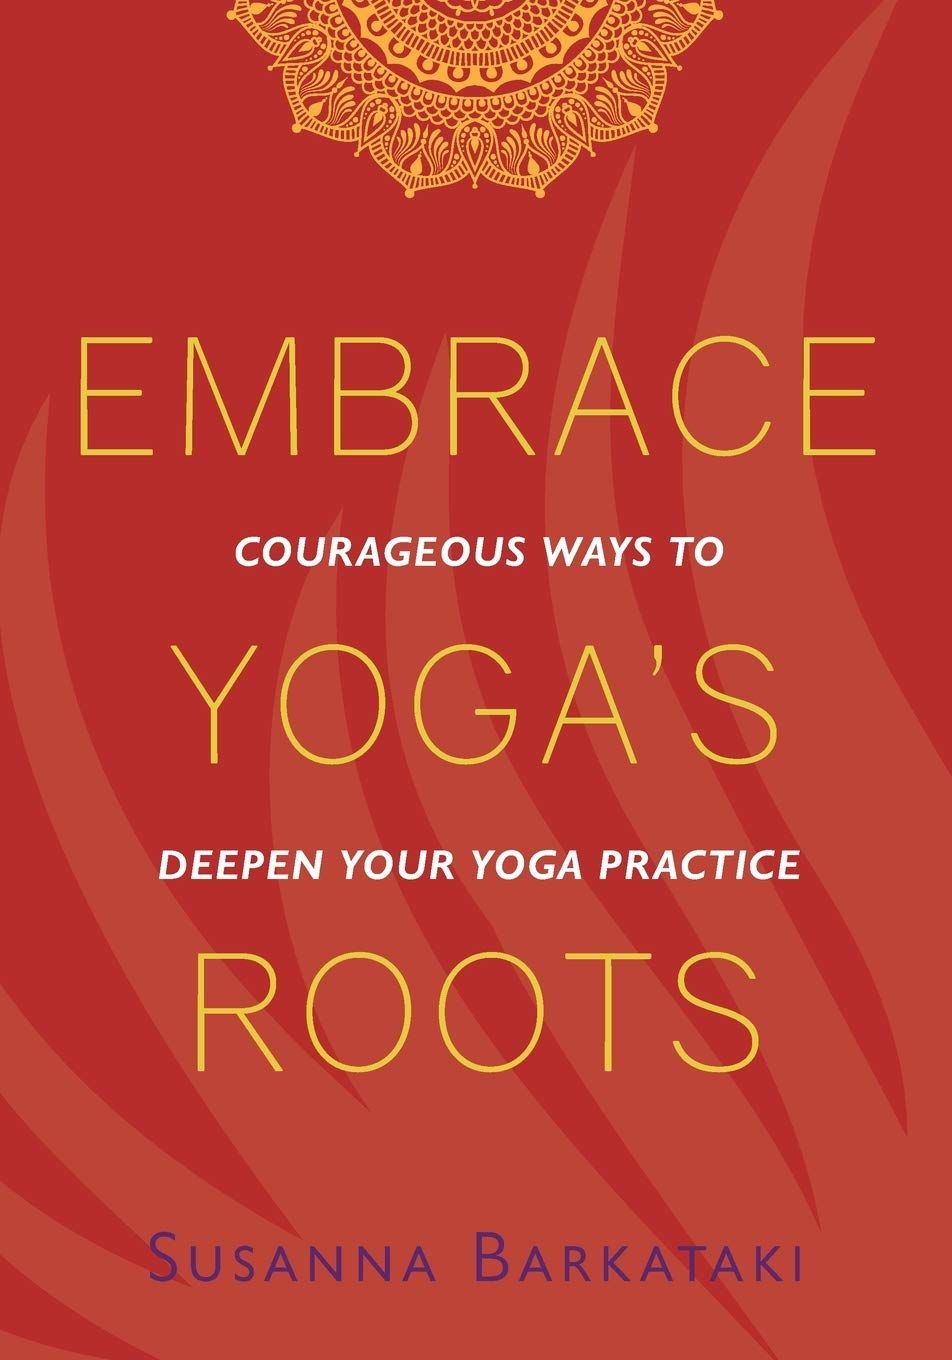 Embrace Yoga's Roots Book Cover